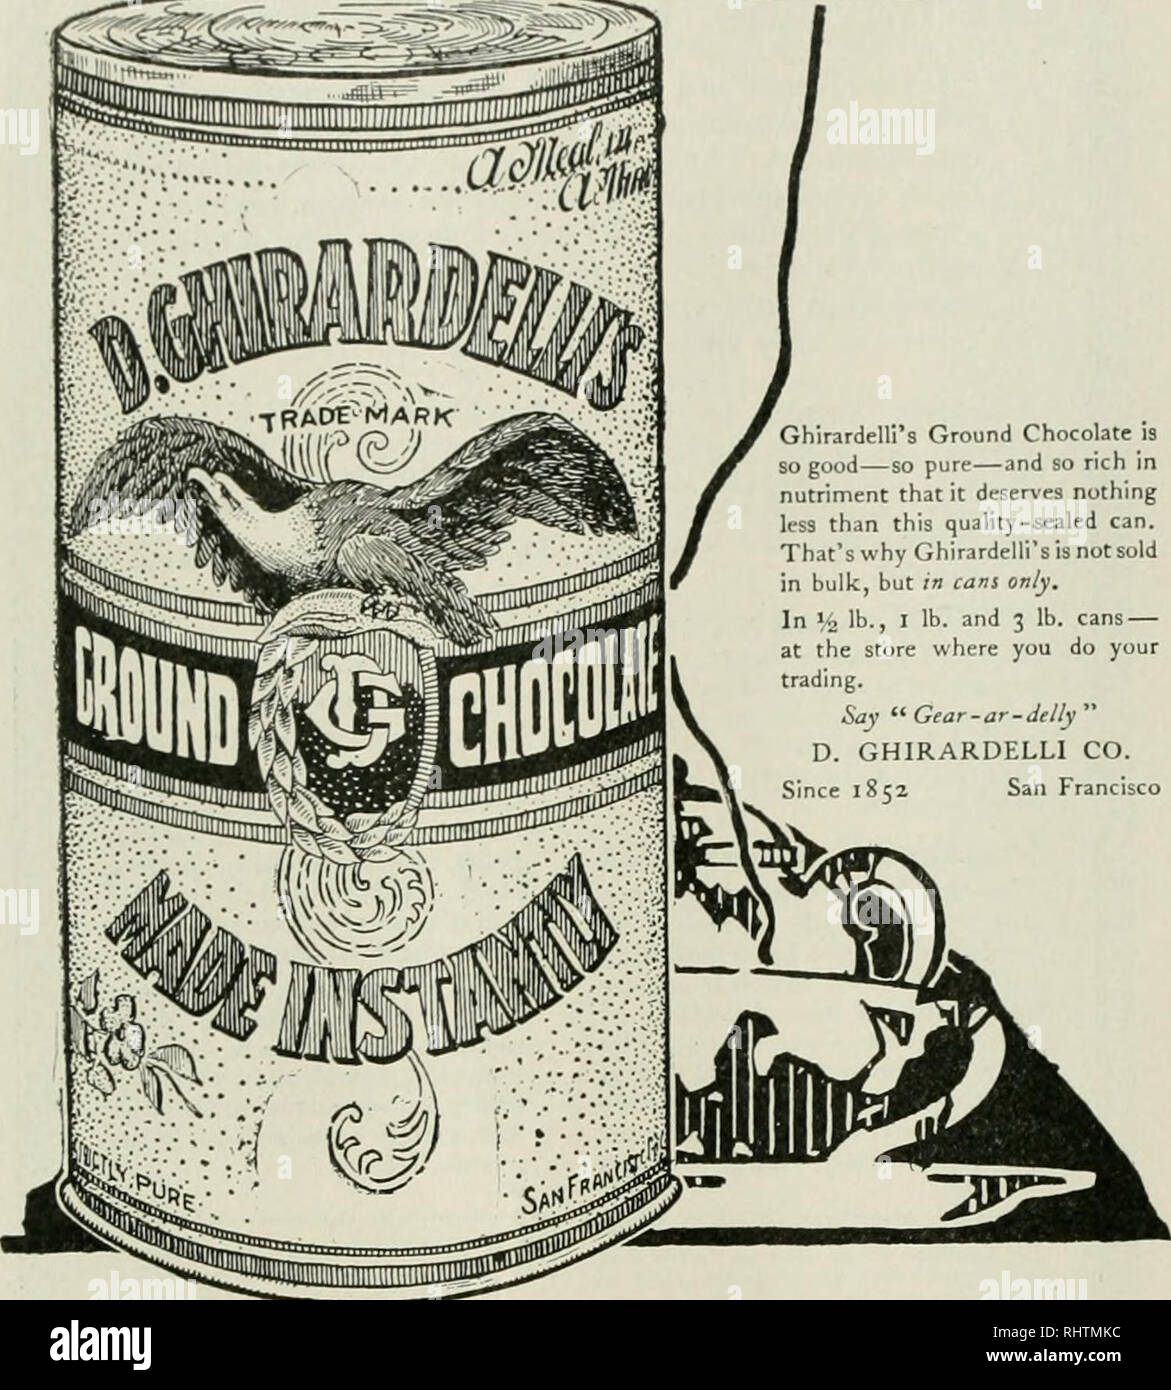 . Better fruit. Fruit-culture. Page 46 BETTER FRUIT -in cans only. Ghlrardelli's Ground Chocolate is so goodâso pureâand so rich in nutriment that it deserves nothing less than this quality-sealed can. That's why Ghirardelli'sisnotsold in bulk, but i/i cans only. In ^i lb., I lb. and 3 lb. cans â at the store where you do your trading. Say '* Gtar-ar-delly &quot; D. GHIRARDELLI CO. Since 1S52 San Francisco GMrardelirs CroundChocolate TniThisr^StiunpPuller .30Days FREE! ll SEND NO MONEY. Prove all my claams on your own farm! Find out how one man alone with a Kirstin â rdlea bifrgest atnmpi. P Stock Photo